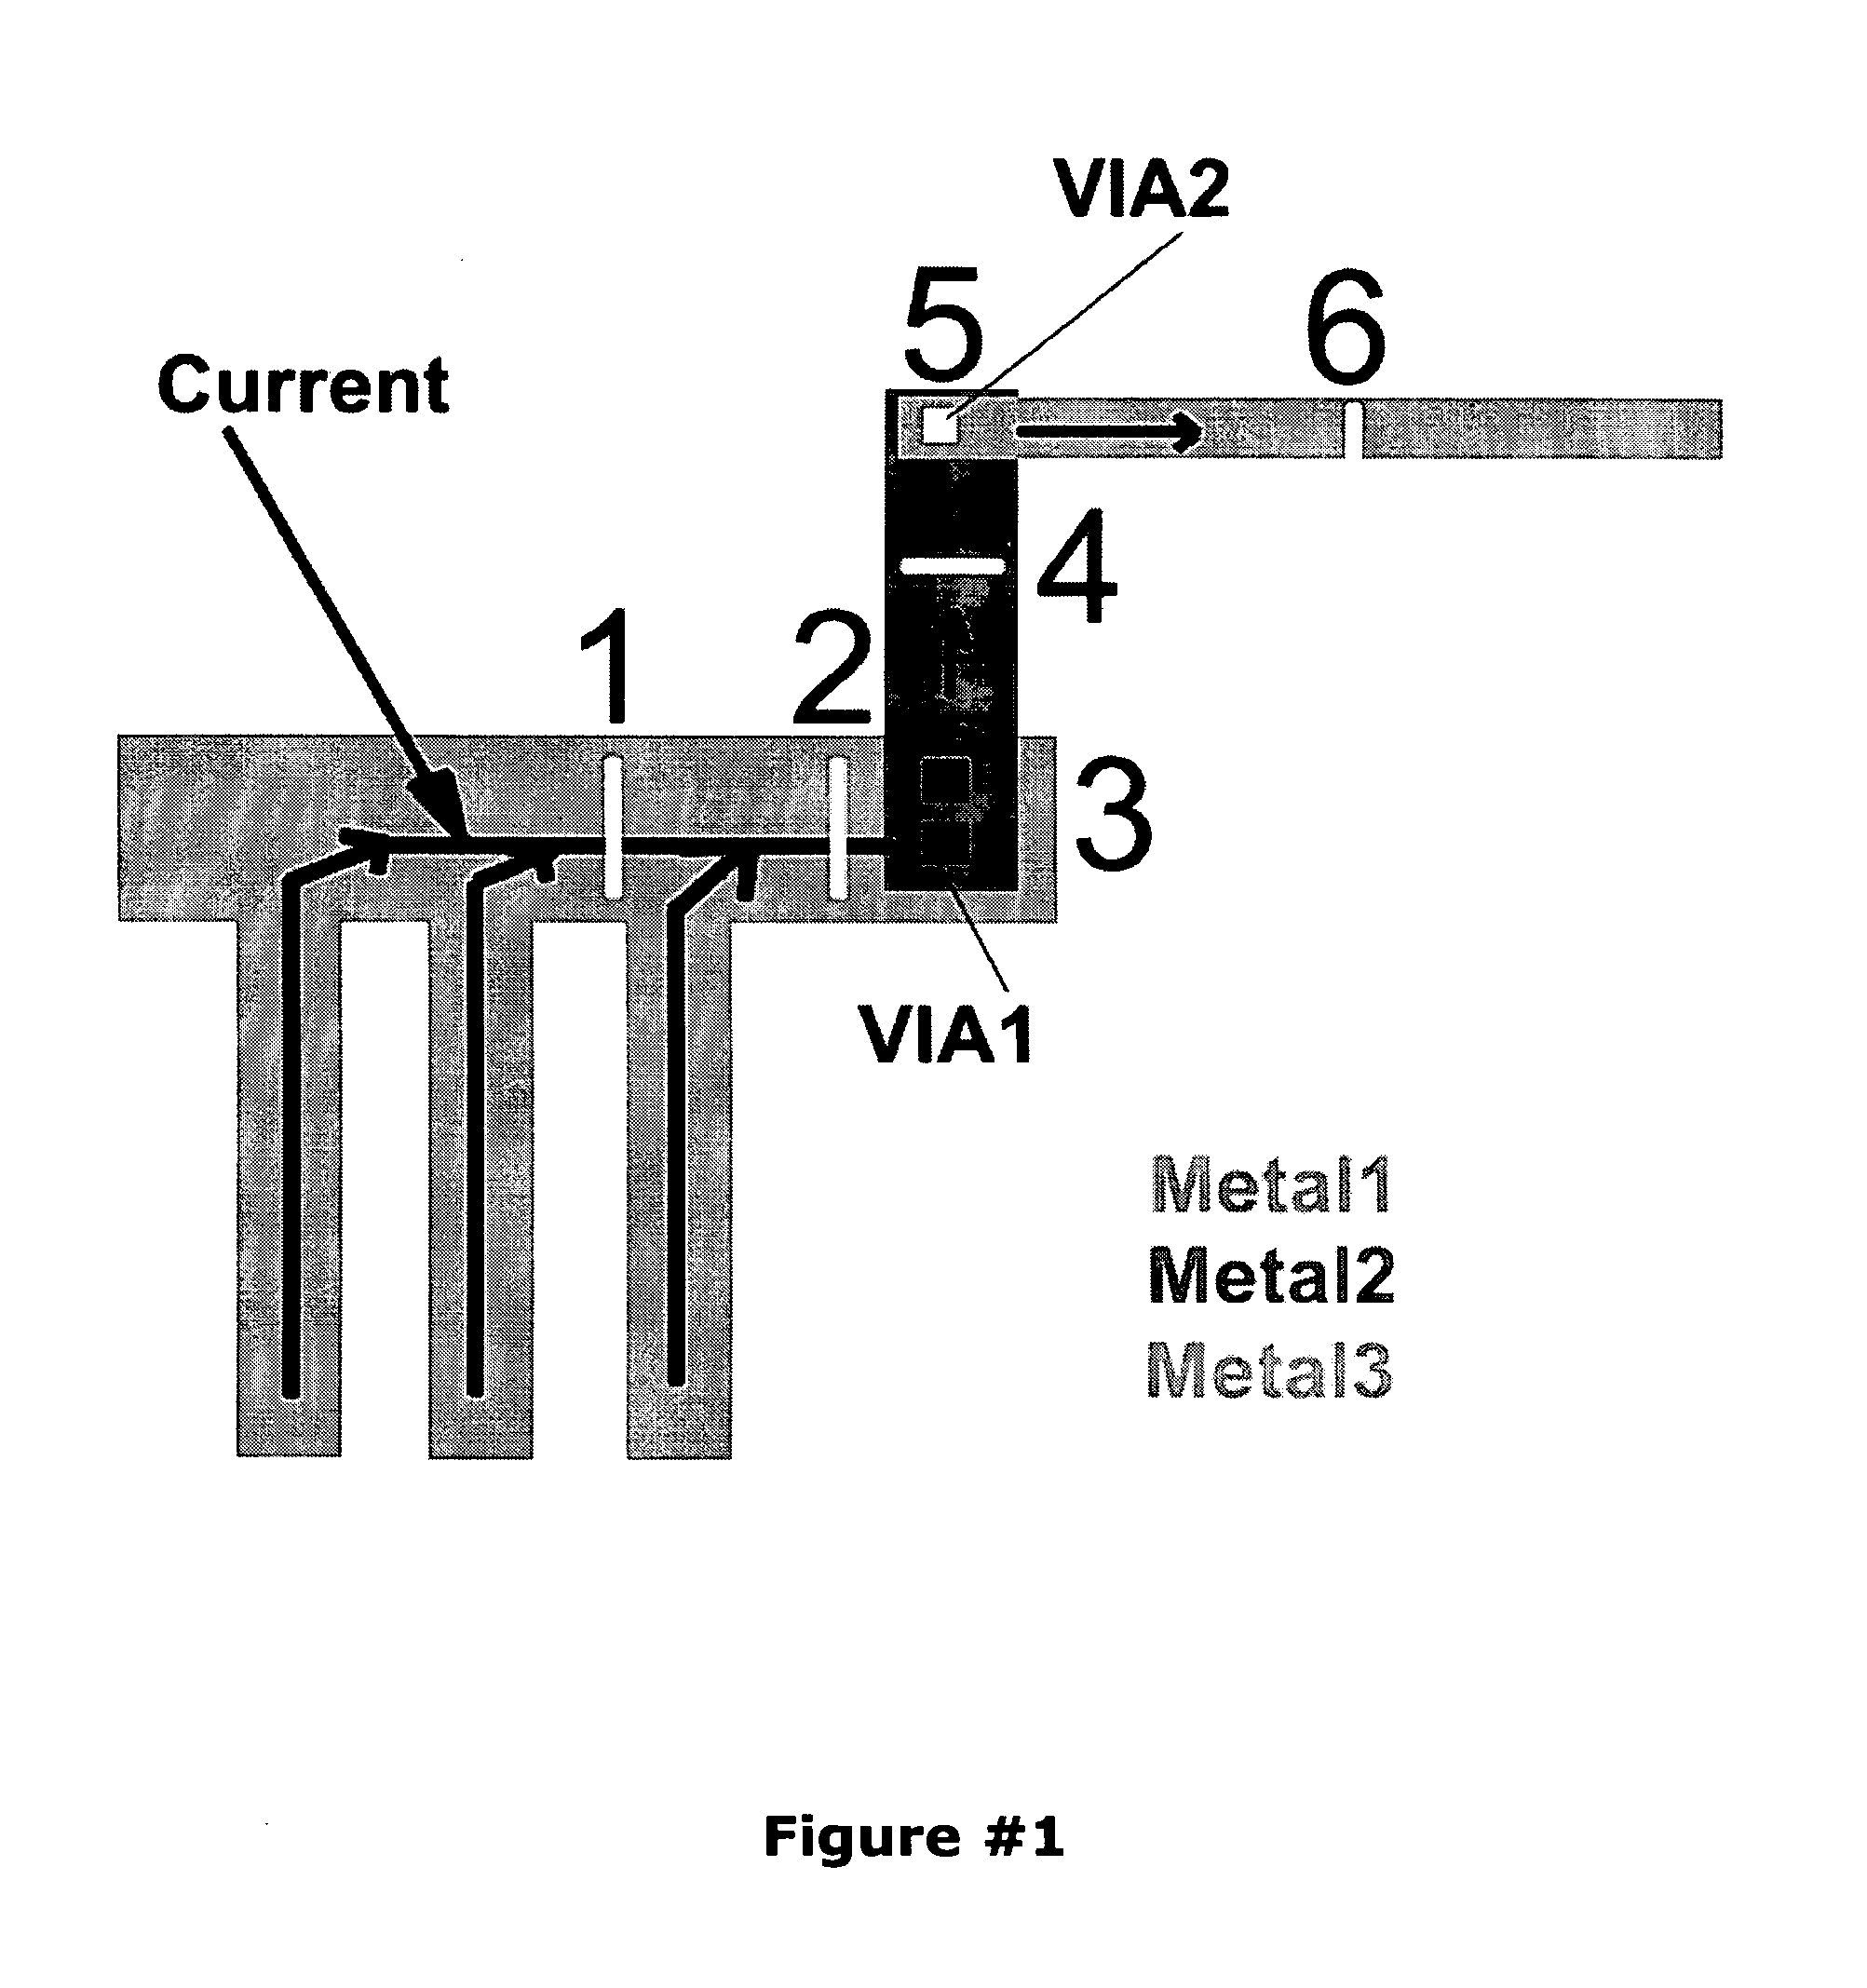 System and method for finding electromigration, self heat and voltage drop violations of an integrated circuit when its design and electrical characterization are incomplete